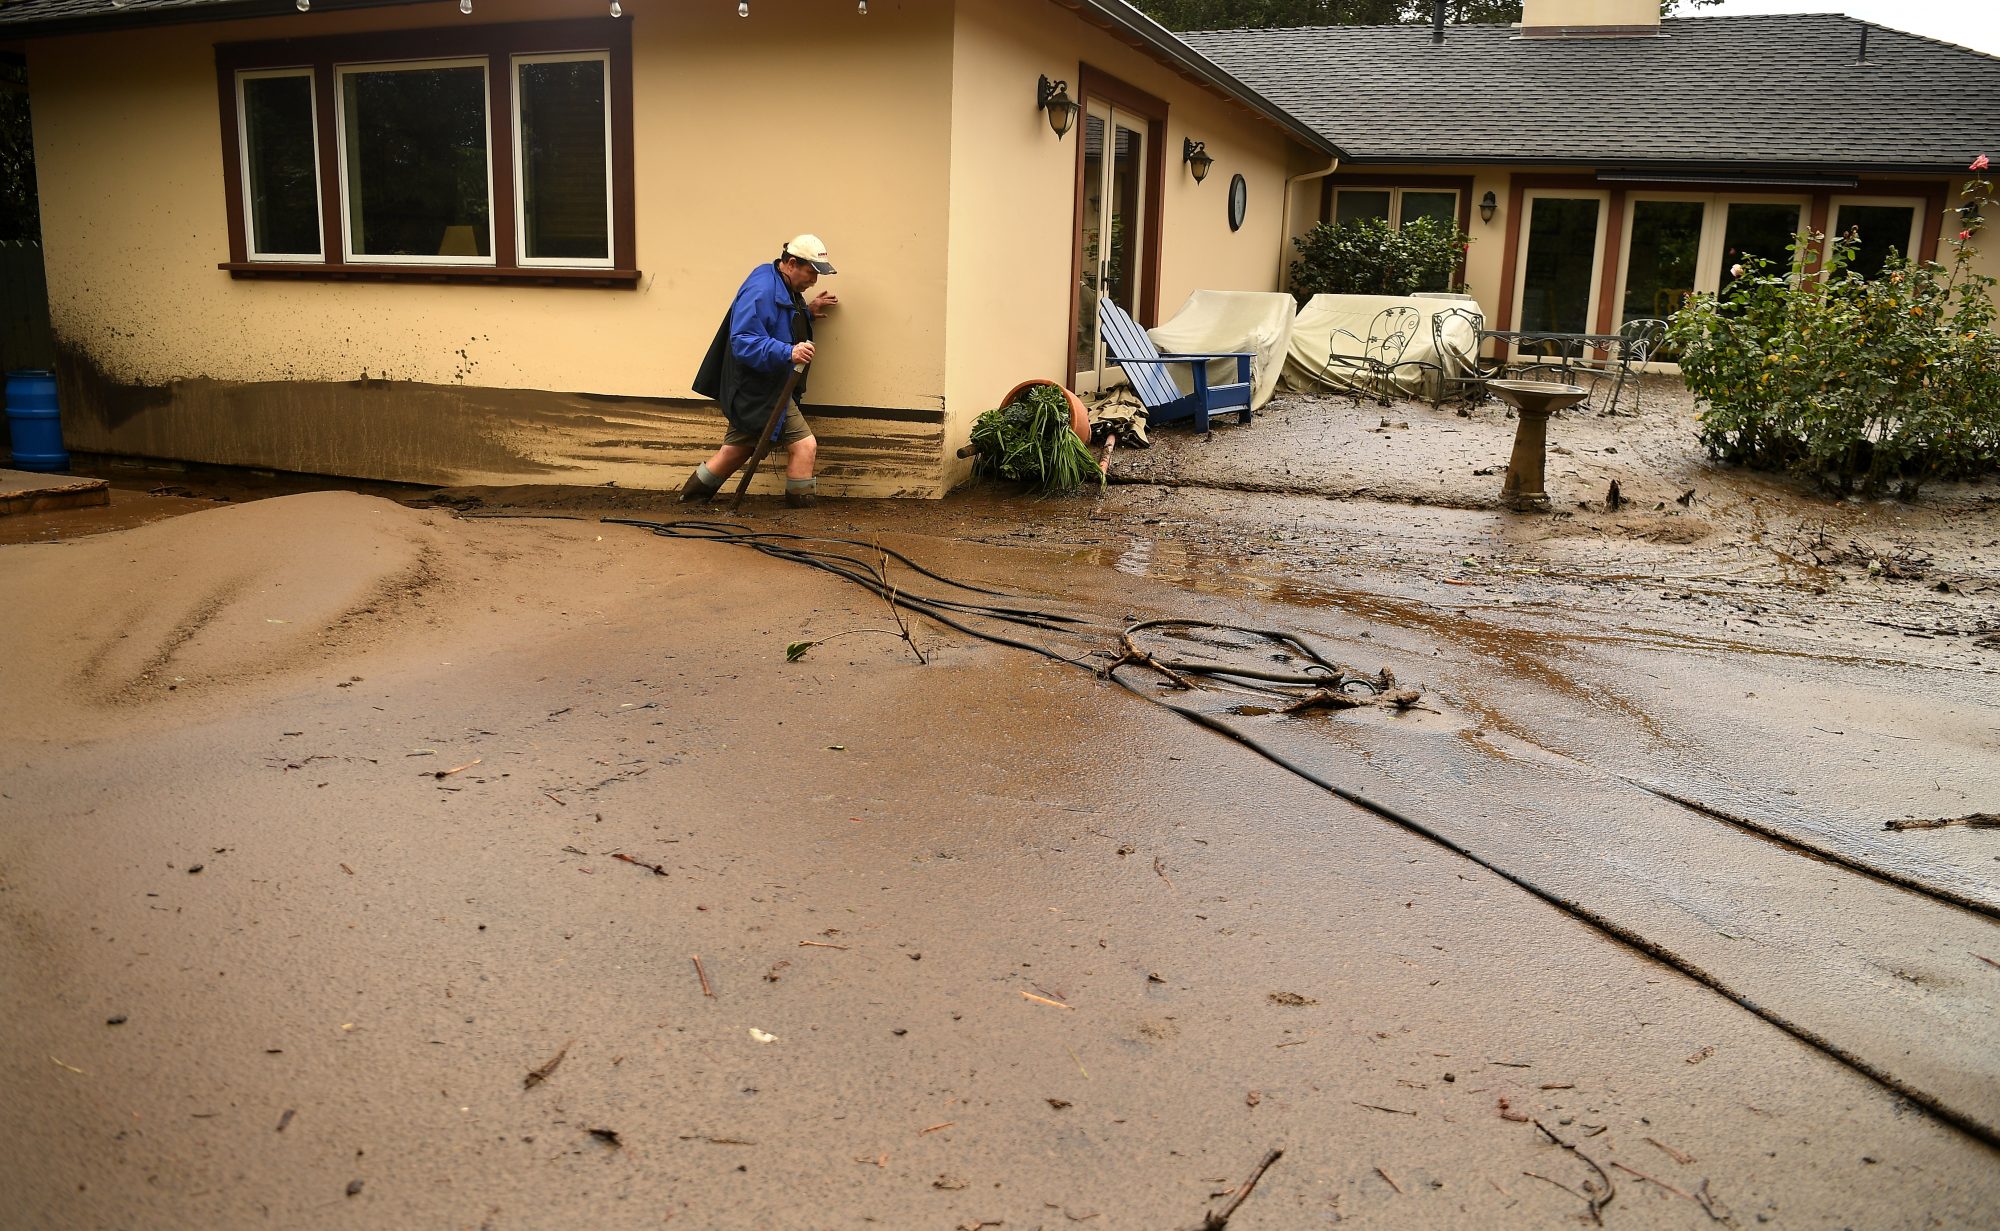 MONTECITO, CA - JANUARY 09: Mark Olson tries to access his house as he climbs through mud in his back yard along Olive Mill Road in Montecito after a major storm hit the burn area Tuesday January 9, 2018 in Montecito, California.